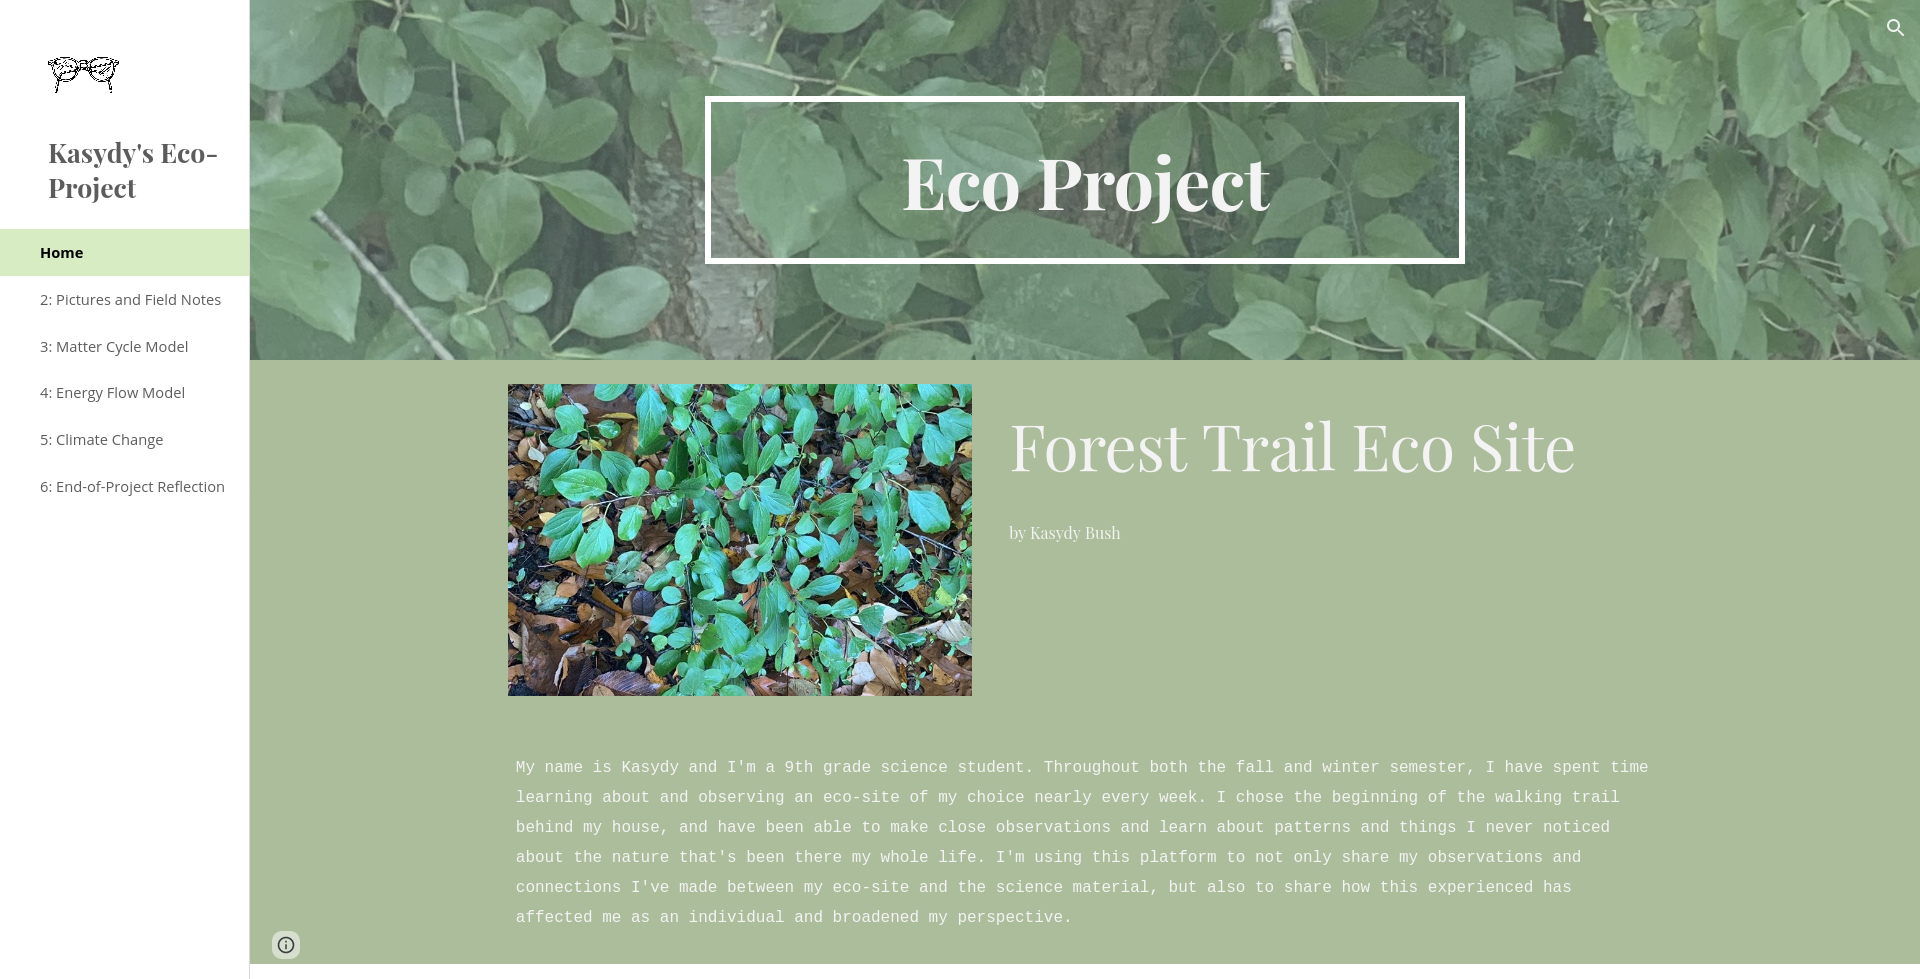 Kasydy's Eco-Project - Southeast Michigan Stewardship Coalition